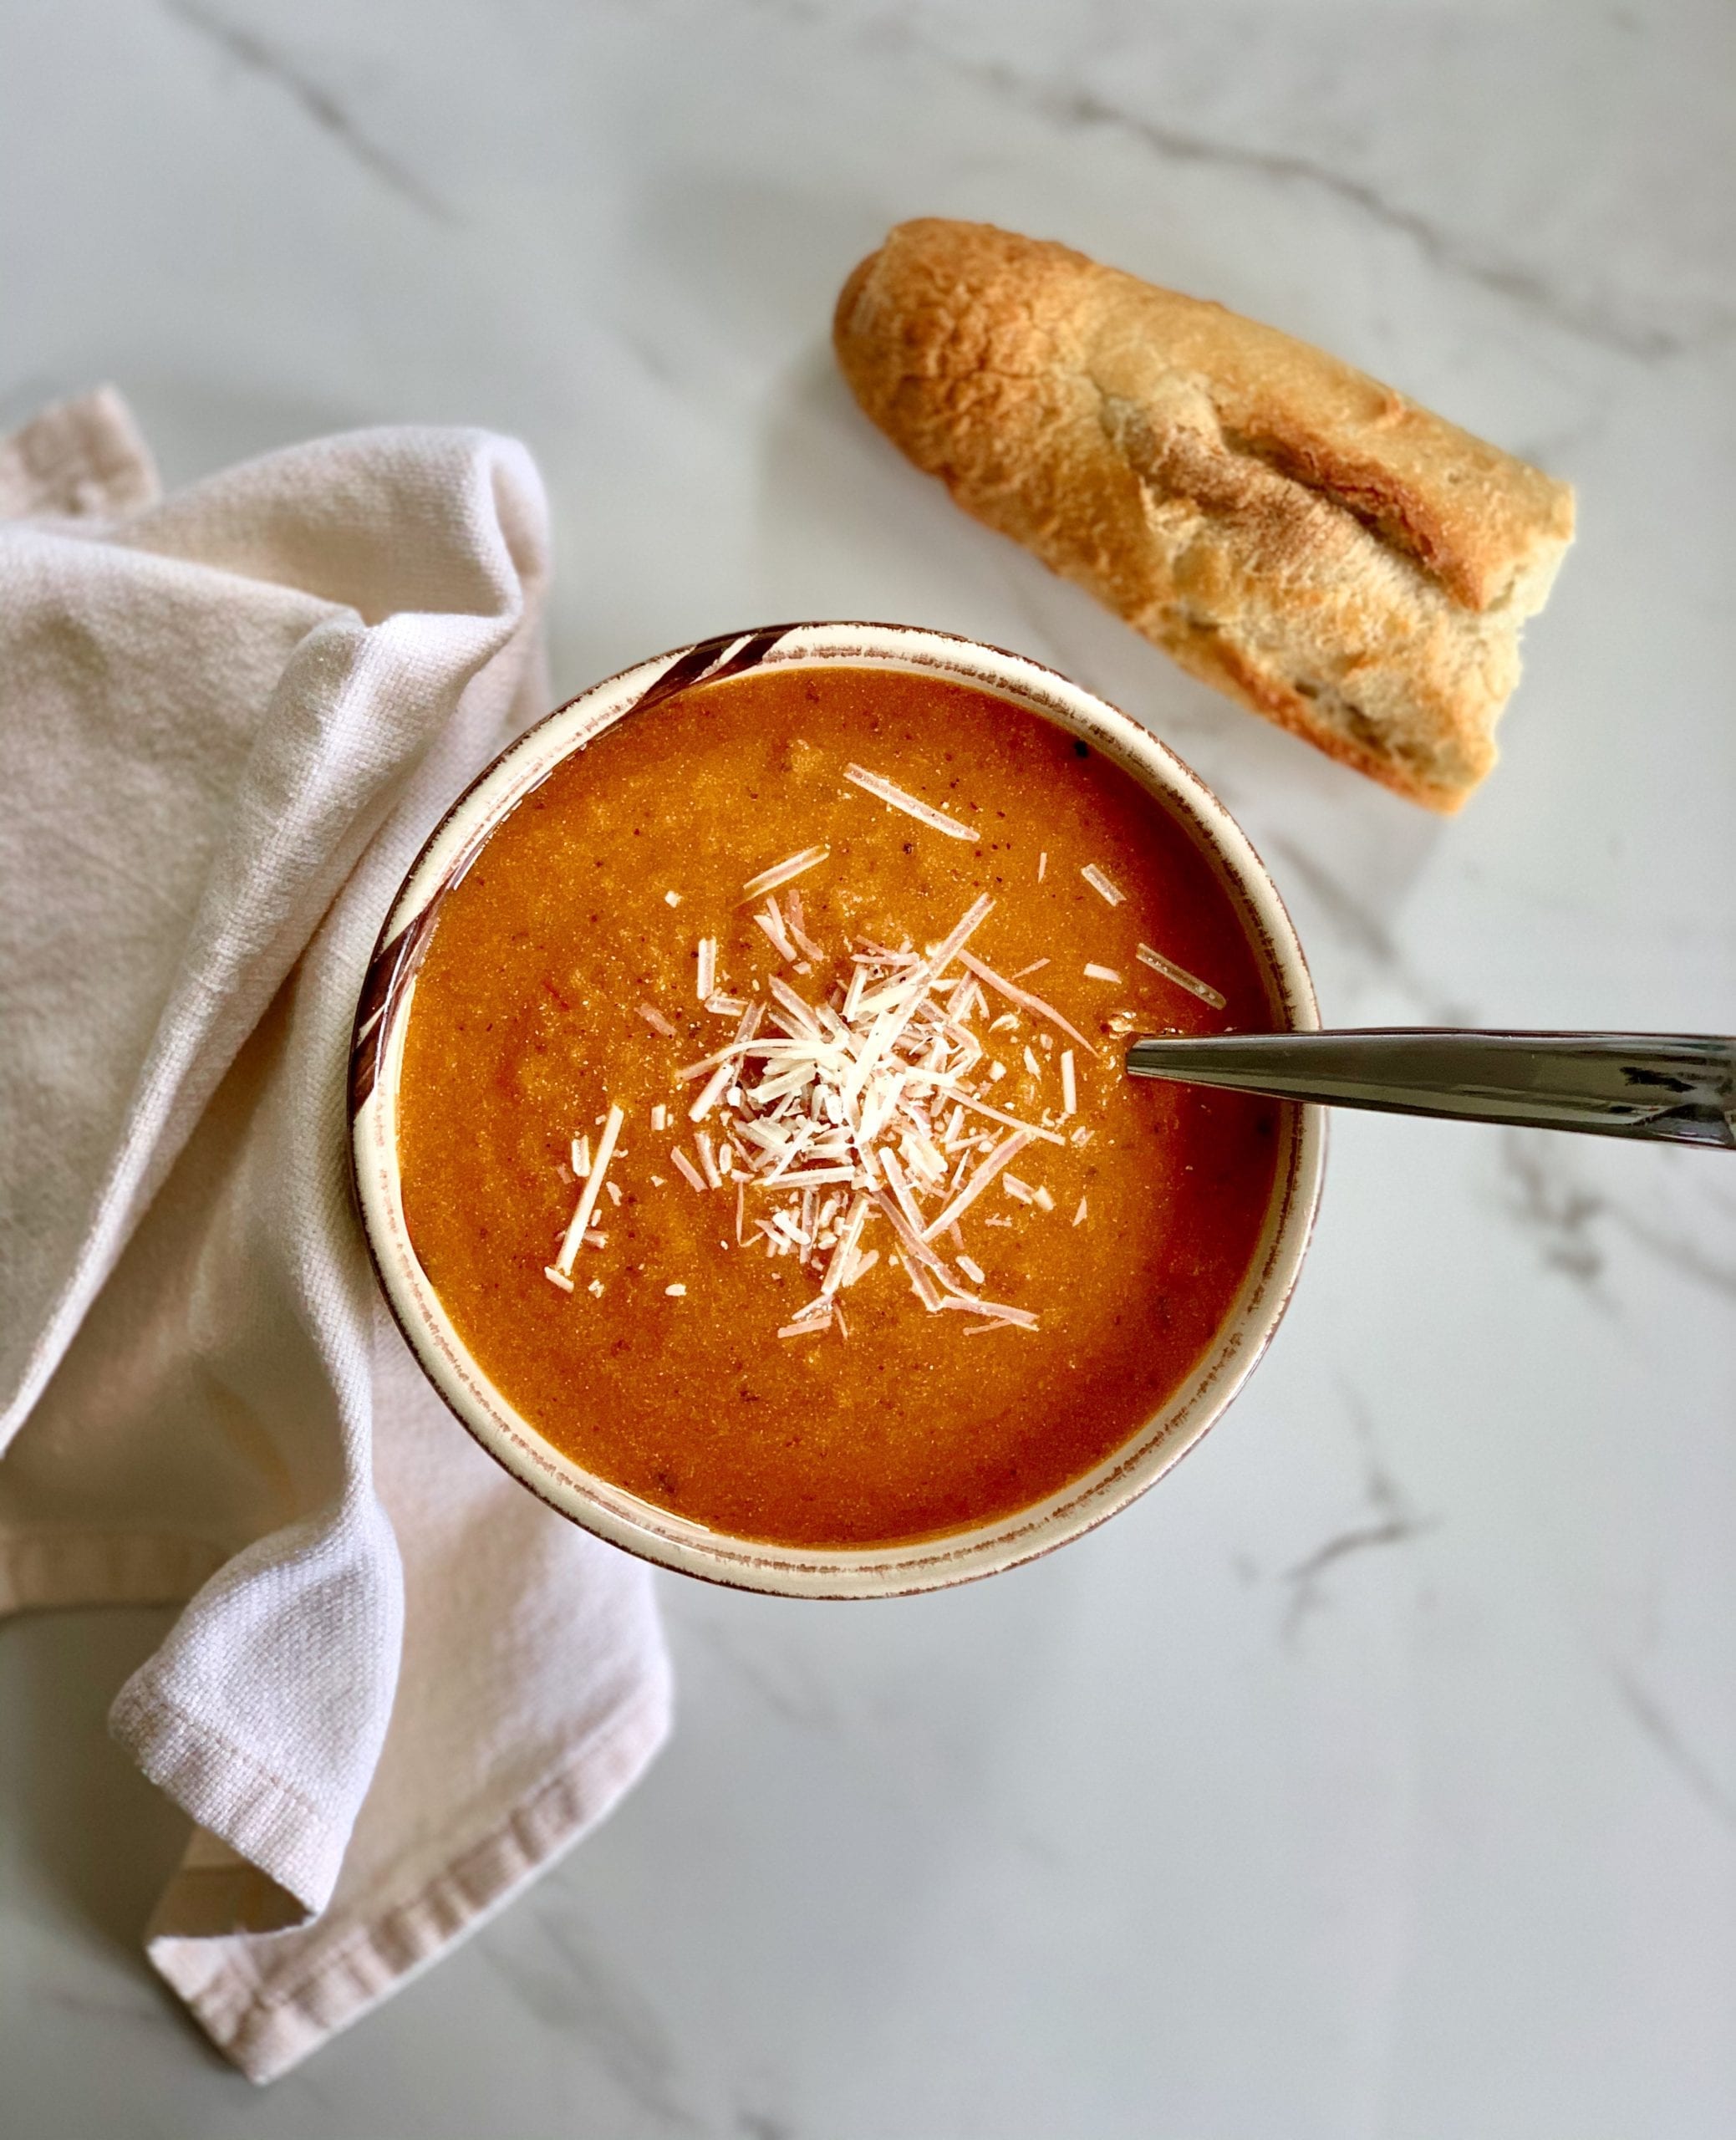 how to make tomato soup, tomato soup and grilled cheese, roasted tomato soup, recipe for tomato soup, homemade tomato soup, creamy tomato soup, tomato soup creamy, tomato soup with basil